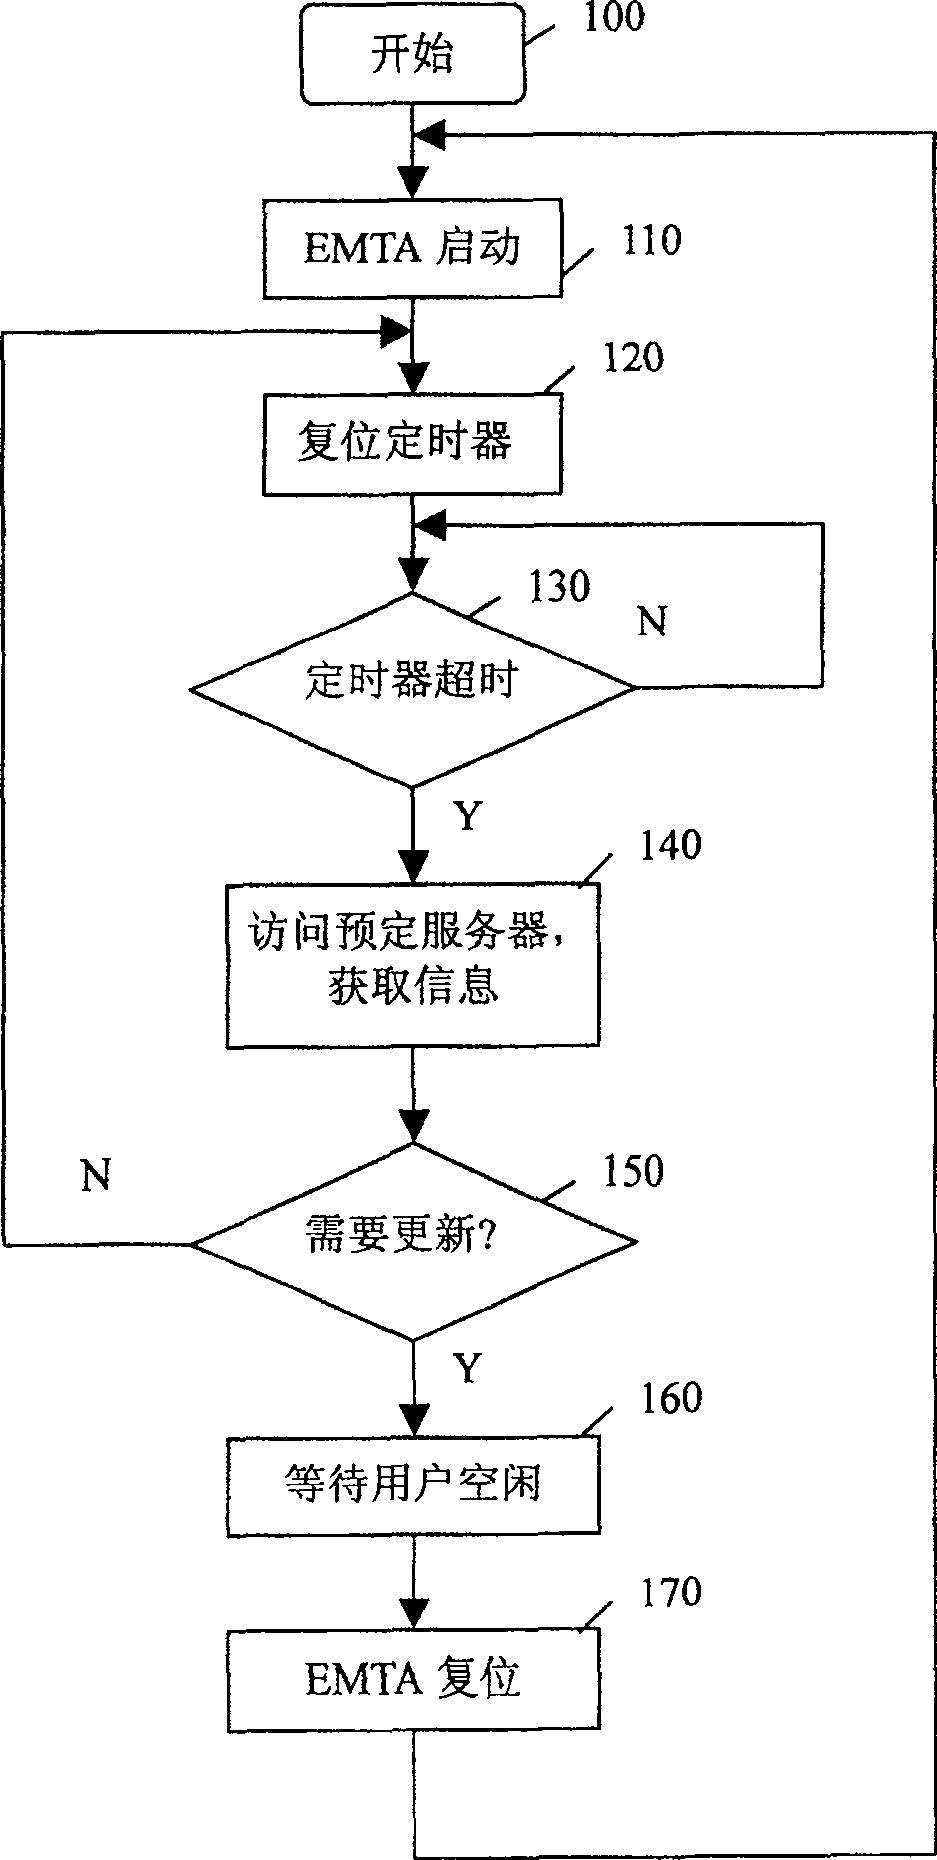 Method of updating configuration file for embedded media terminal adapter